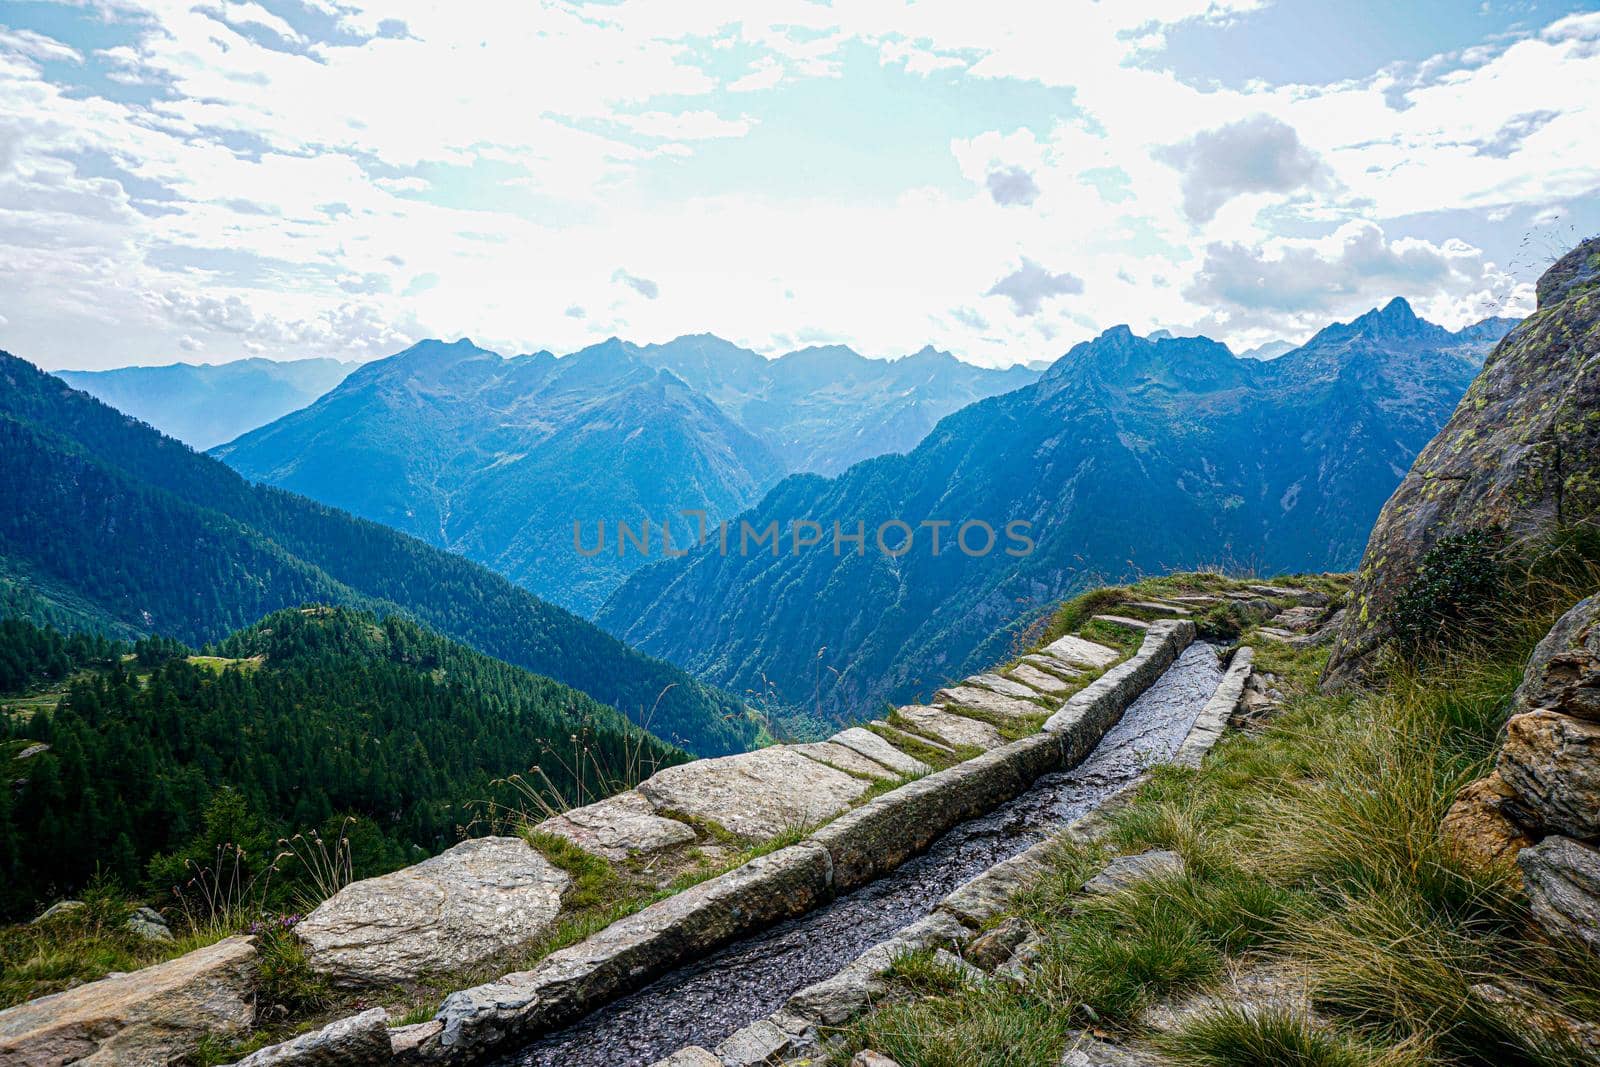 View over the canaa aqueduct over the Val Lavizzara, Switzerland